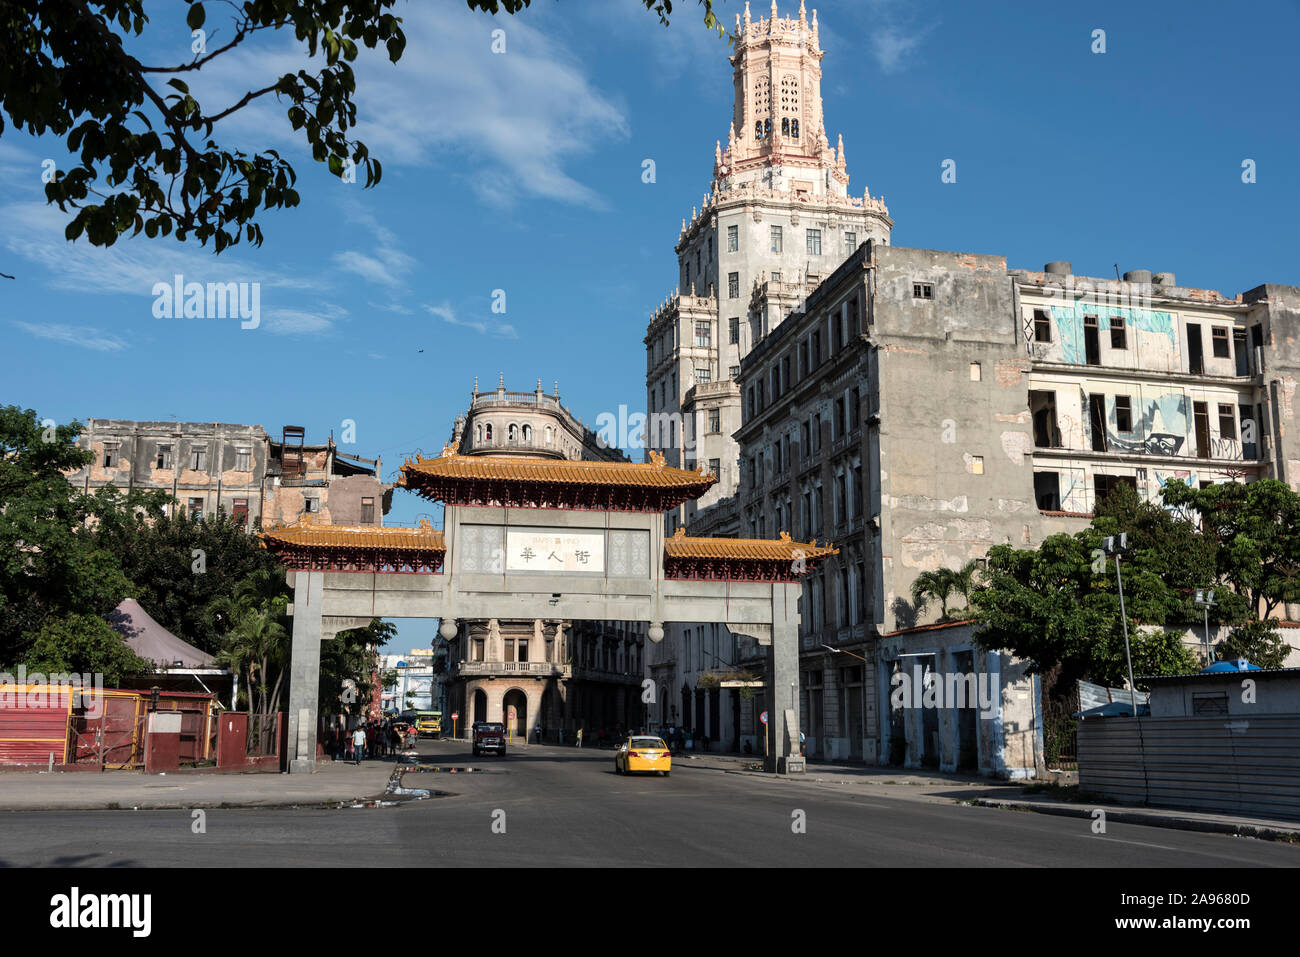 The Chinese Quarter Gate or the paifang at the entrance of Havana's Chinatown -Barrio Chino in Cuba.   The tower is the ETECSA - Telecommunications Co Stock Photo